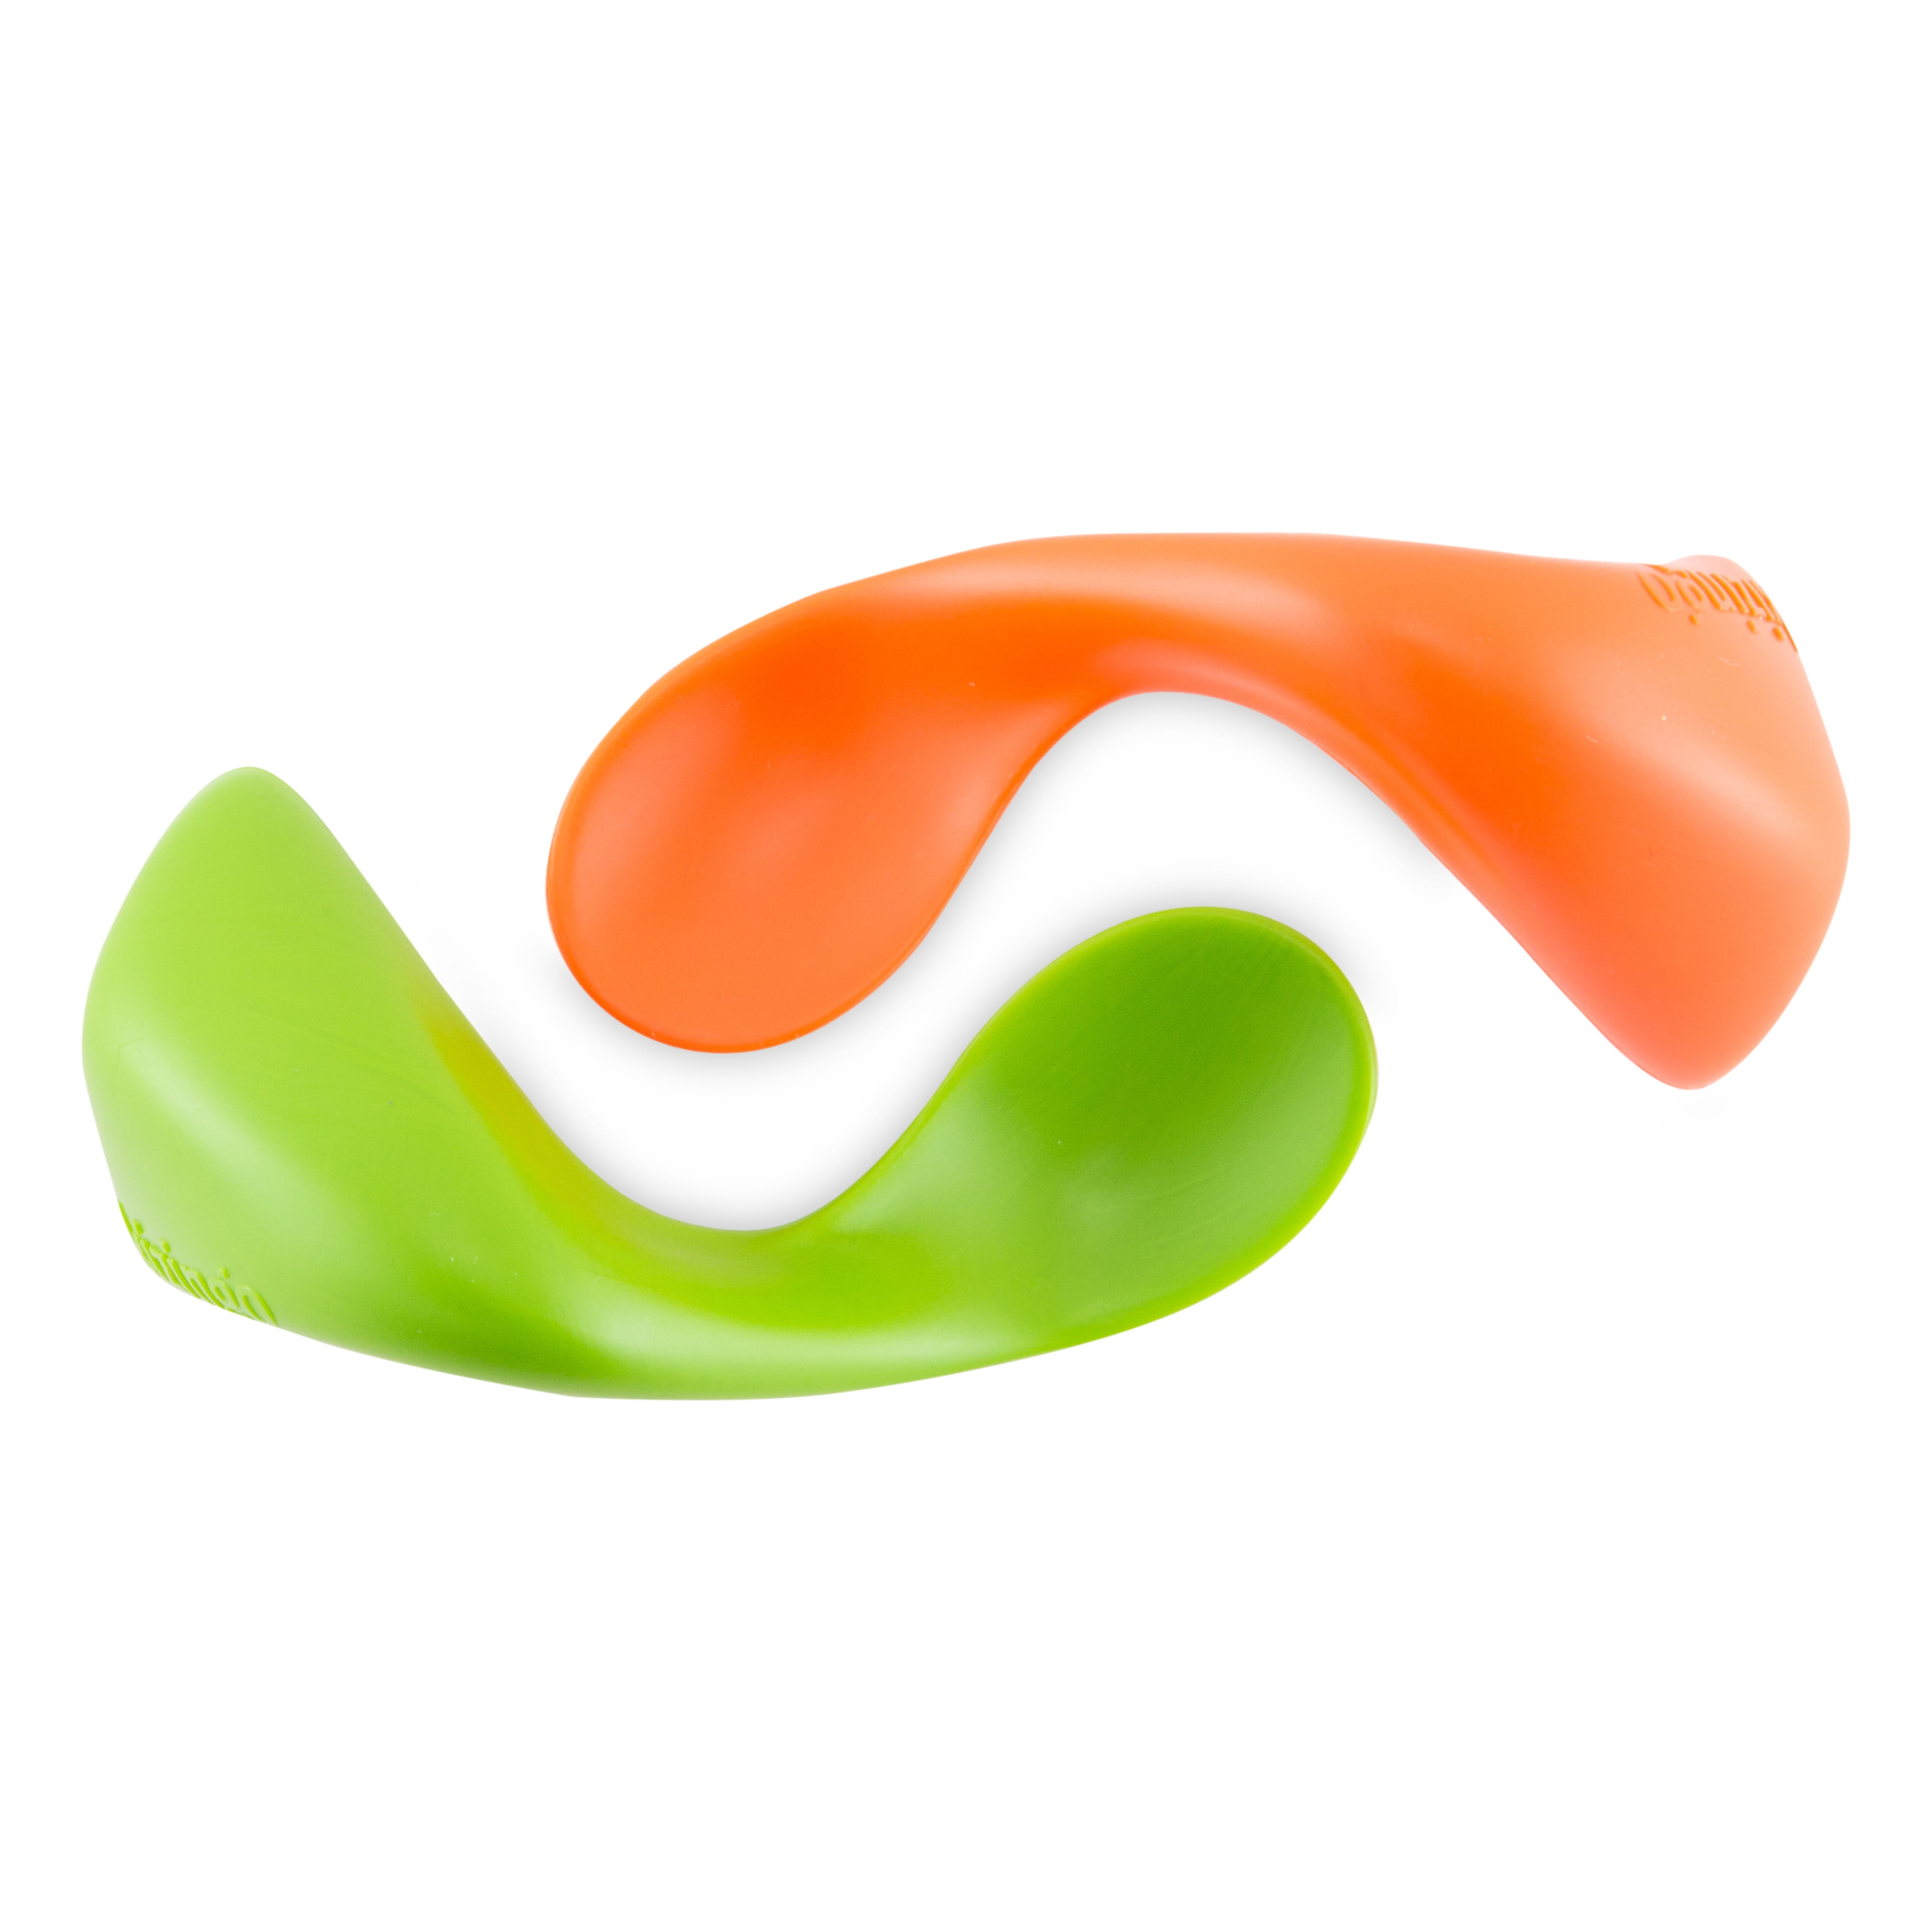 Right-Handed Toddler Spoon 2 Pack - Peas + Carrots 